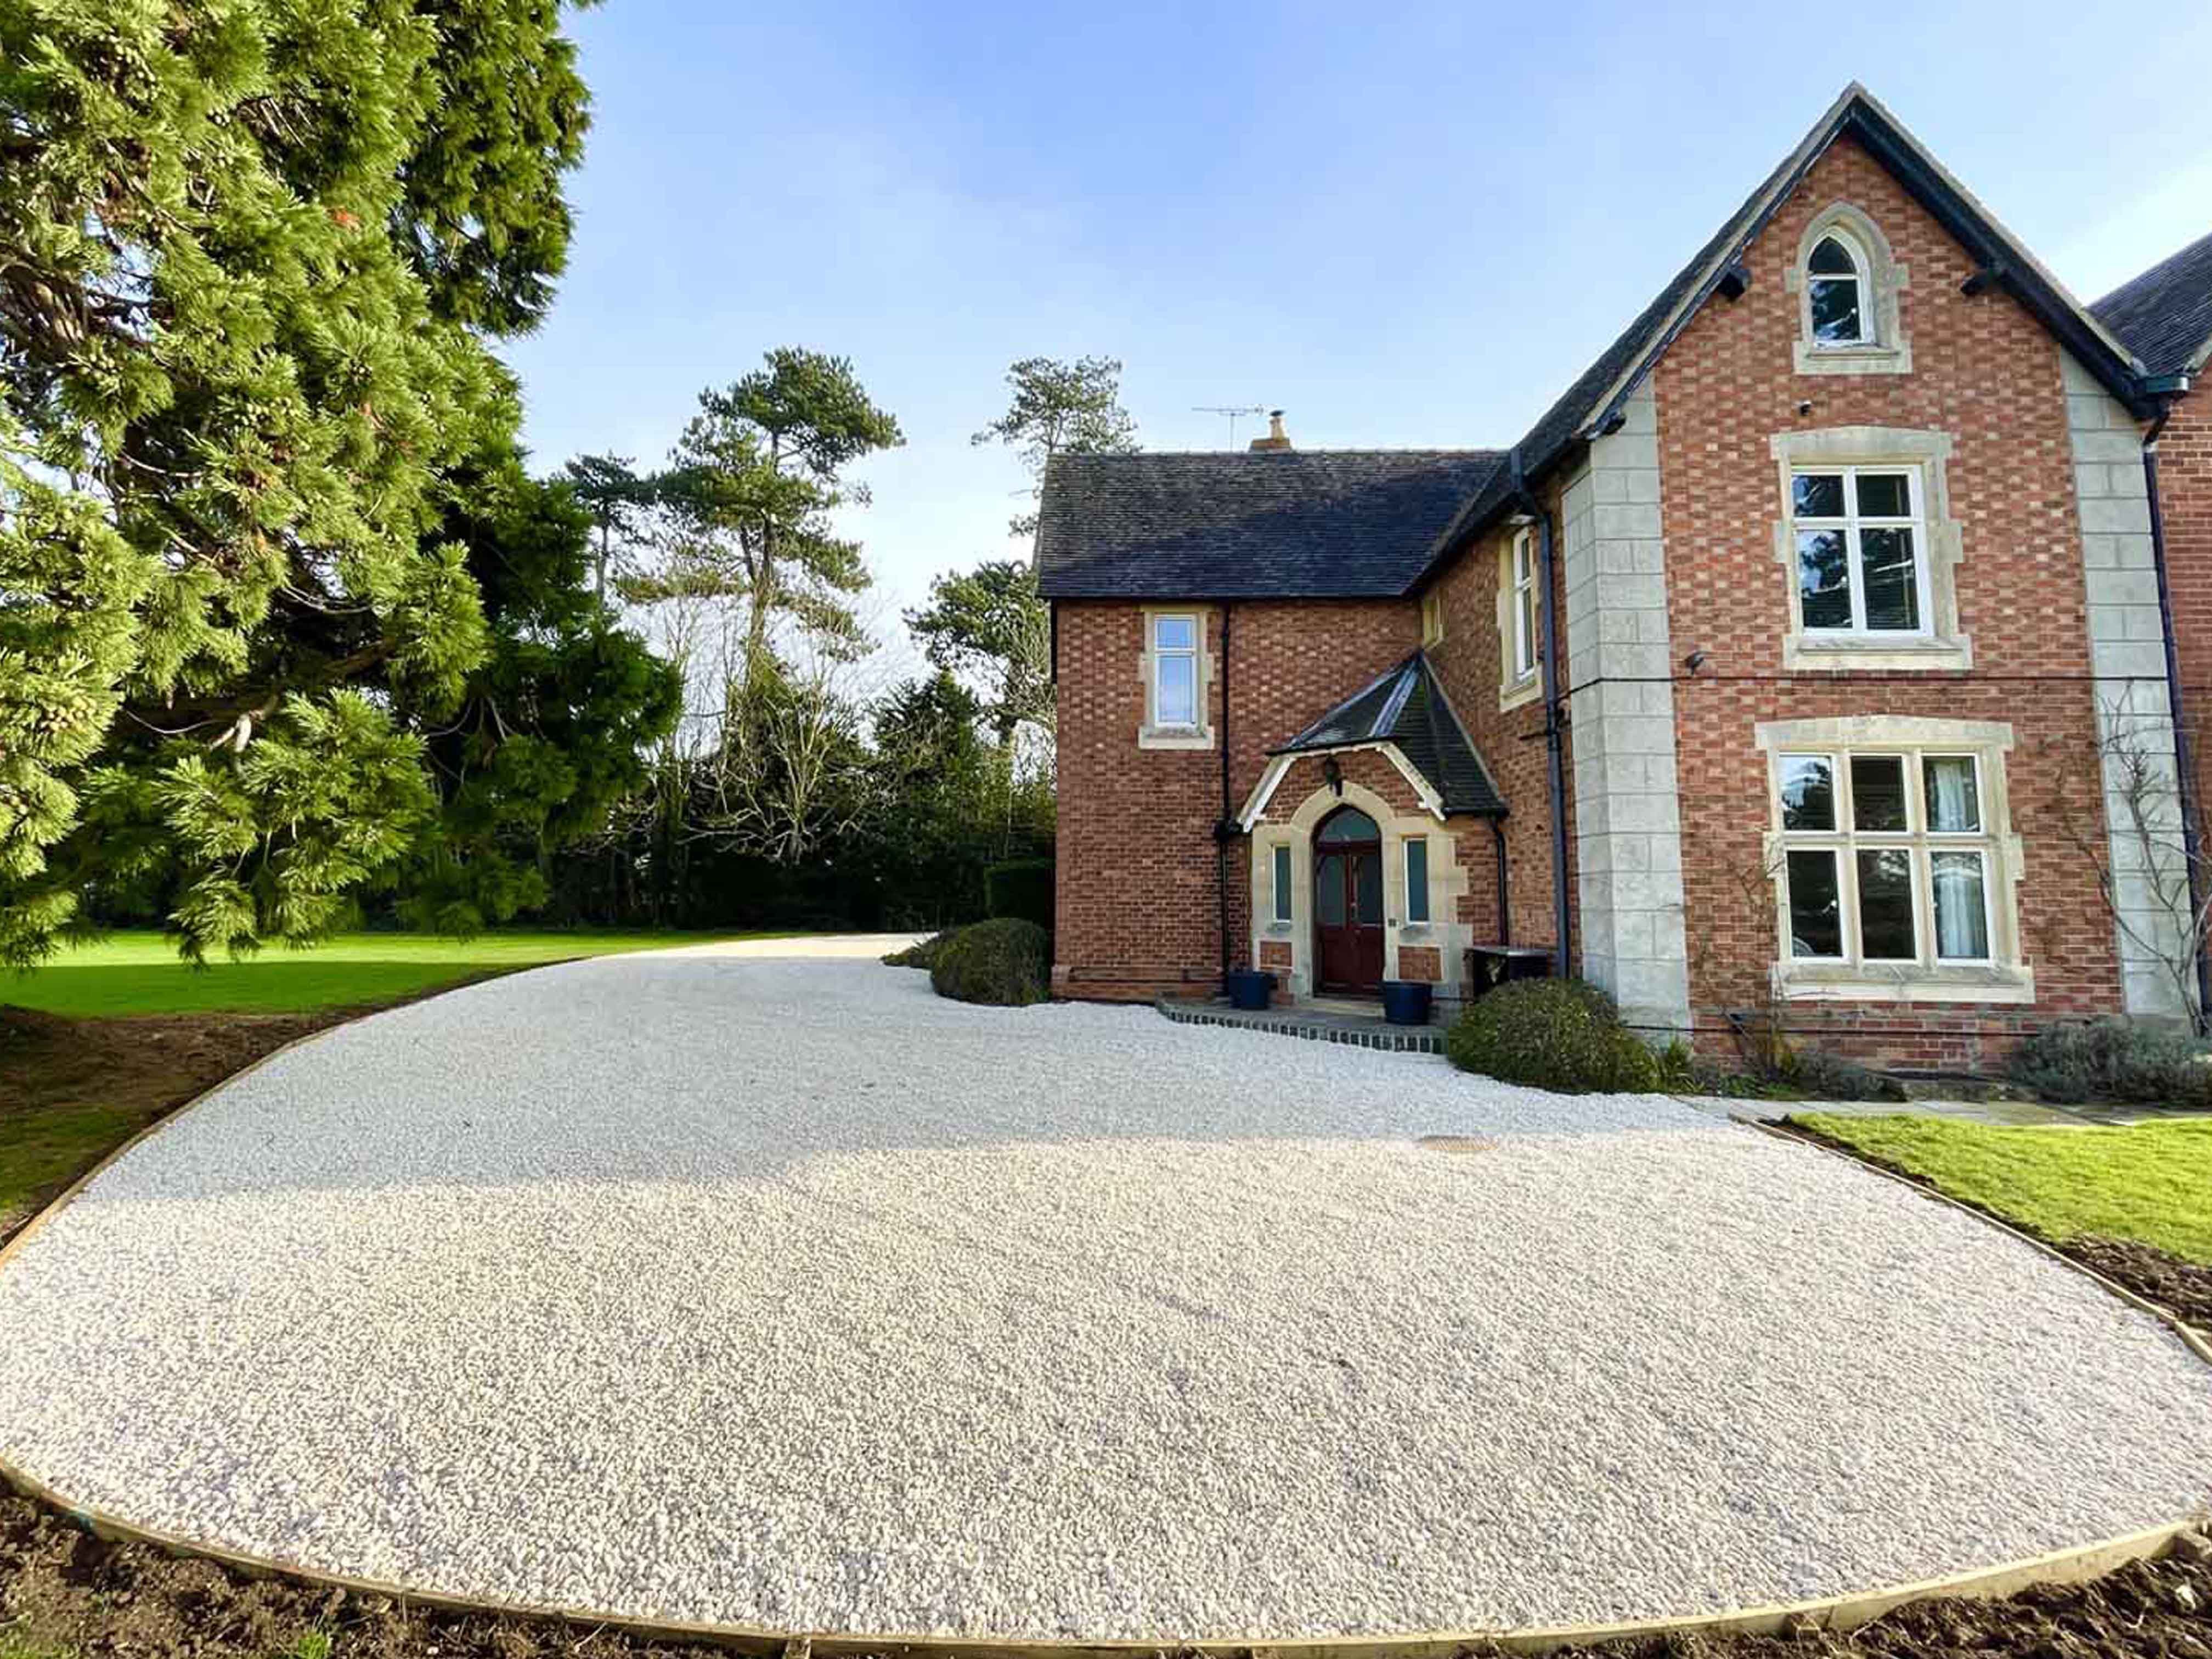 A beautiful white gravel driveway infront of a country house